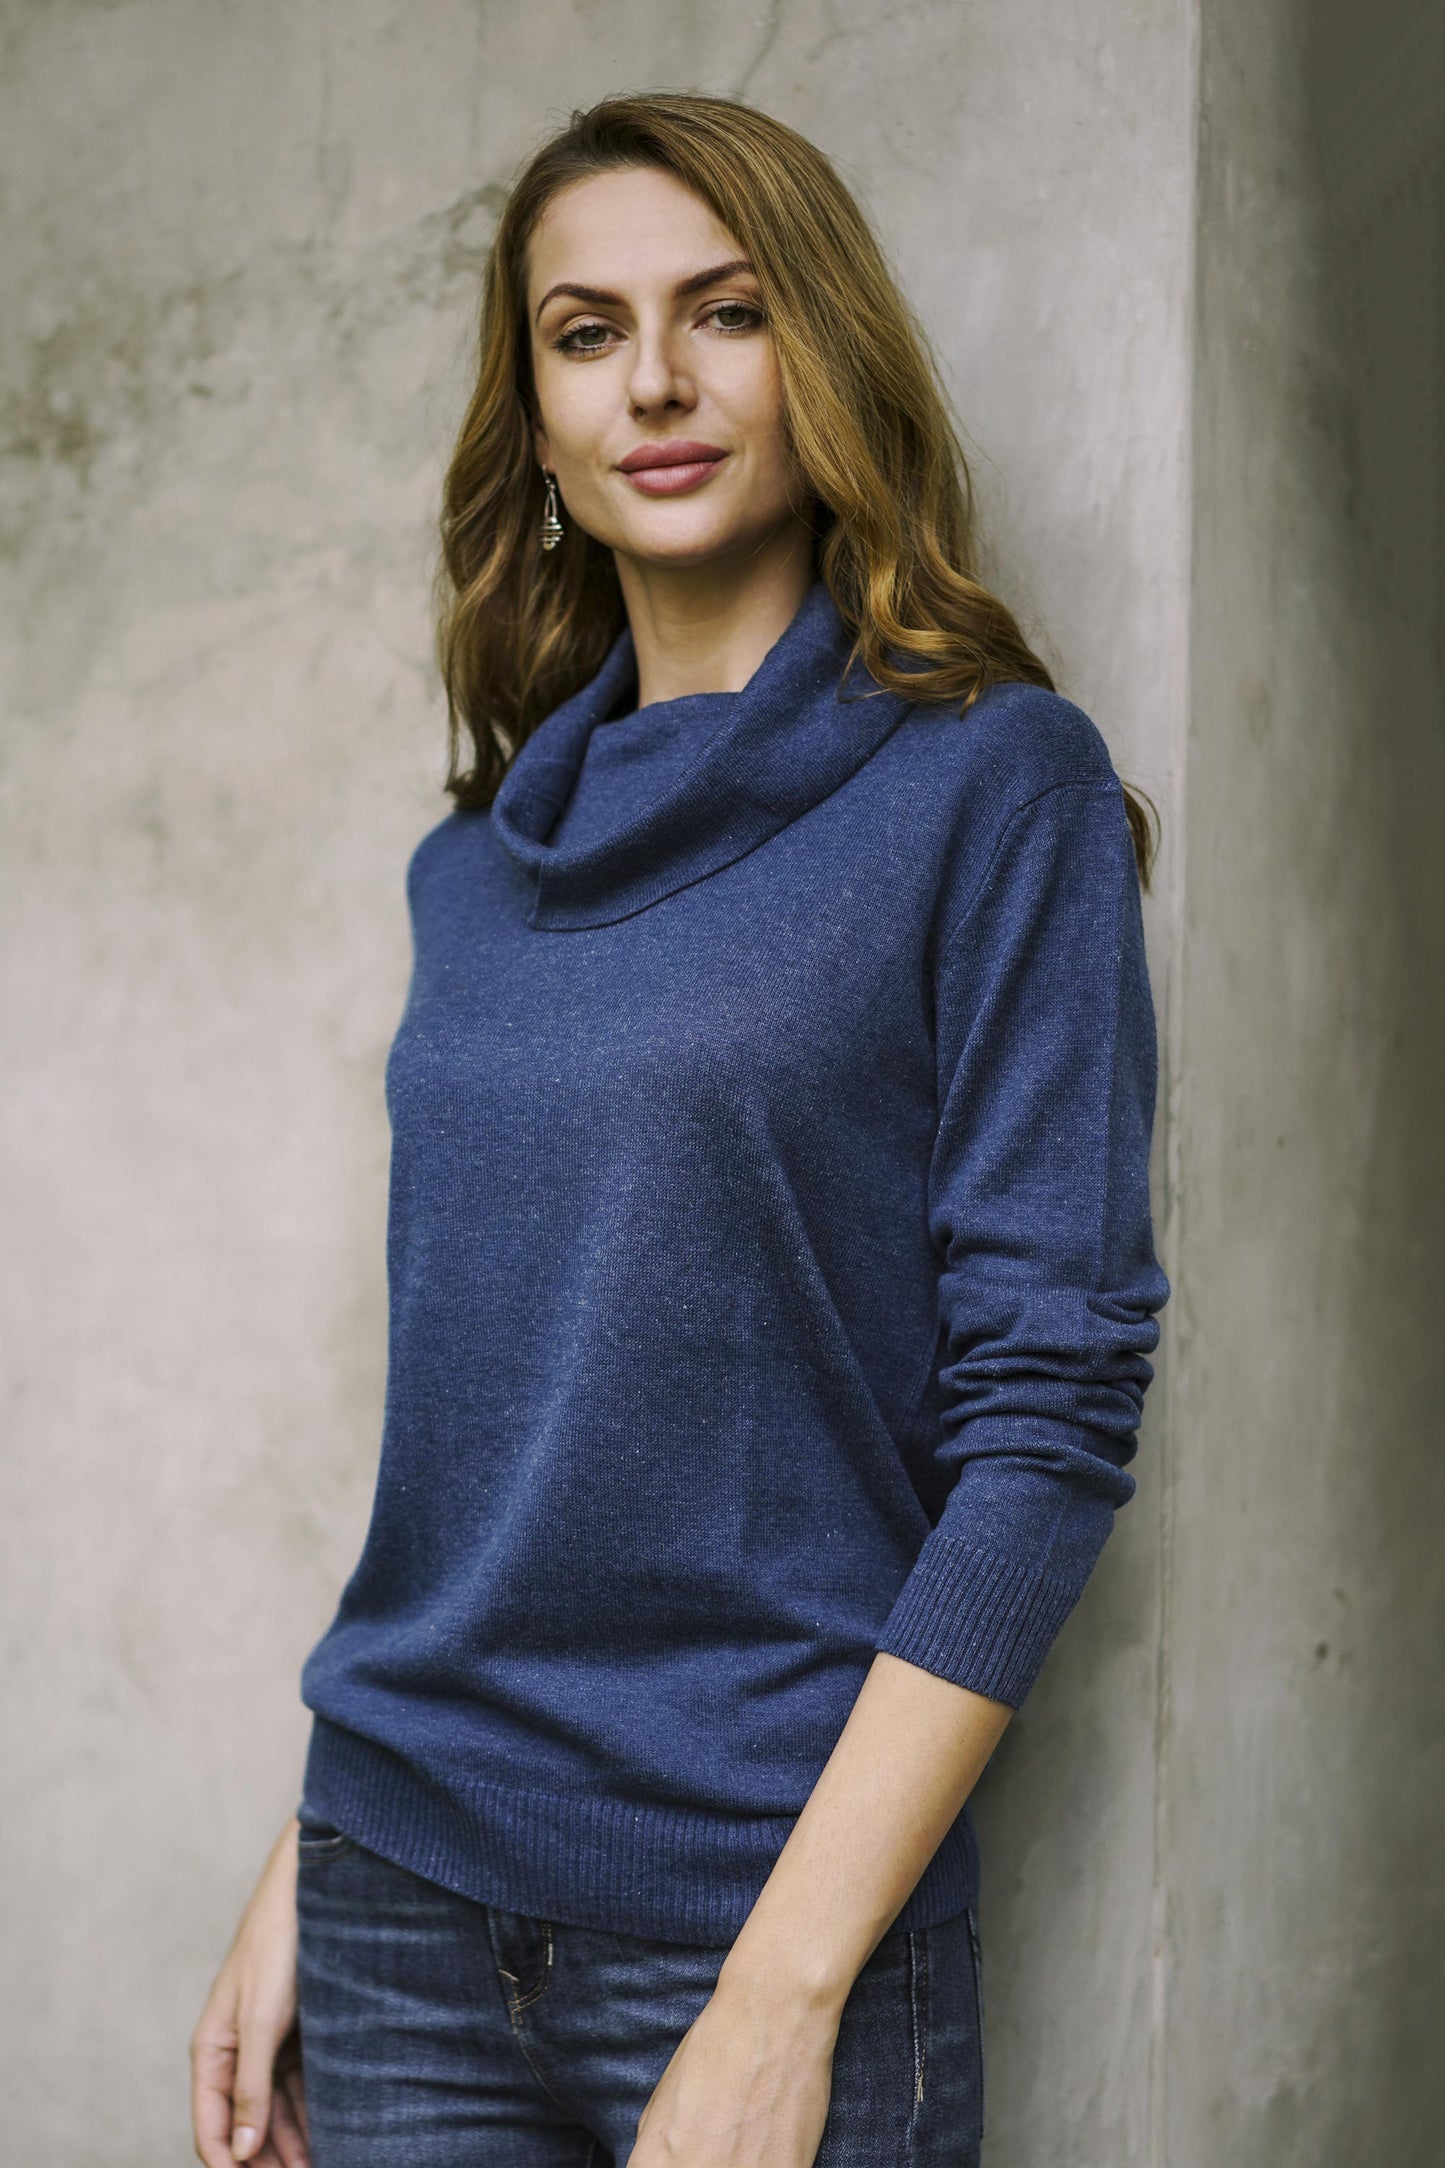 Royal Blue Versatility Knit Cotton Blend Pullover in Solid Royal Blue from Peru